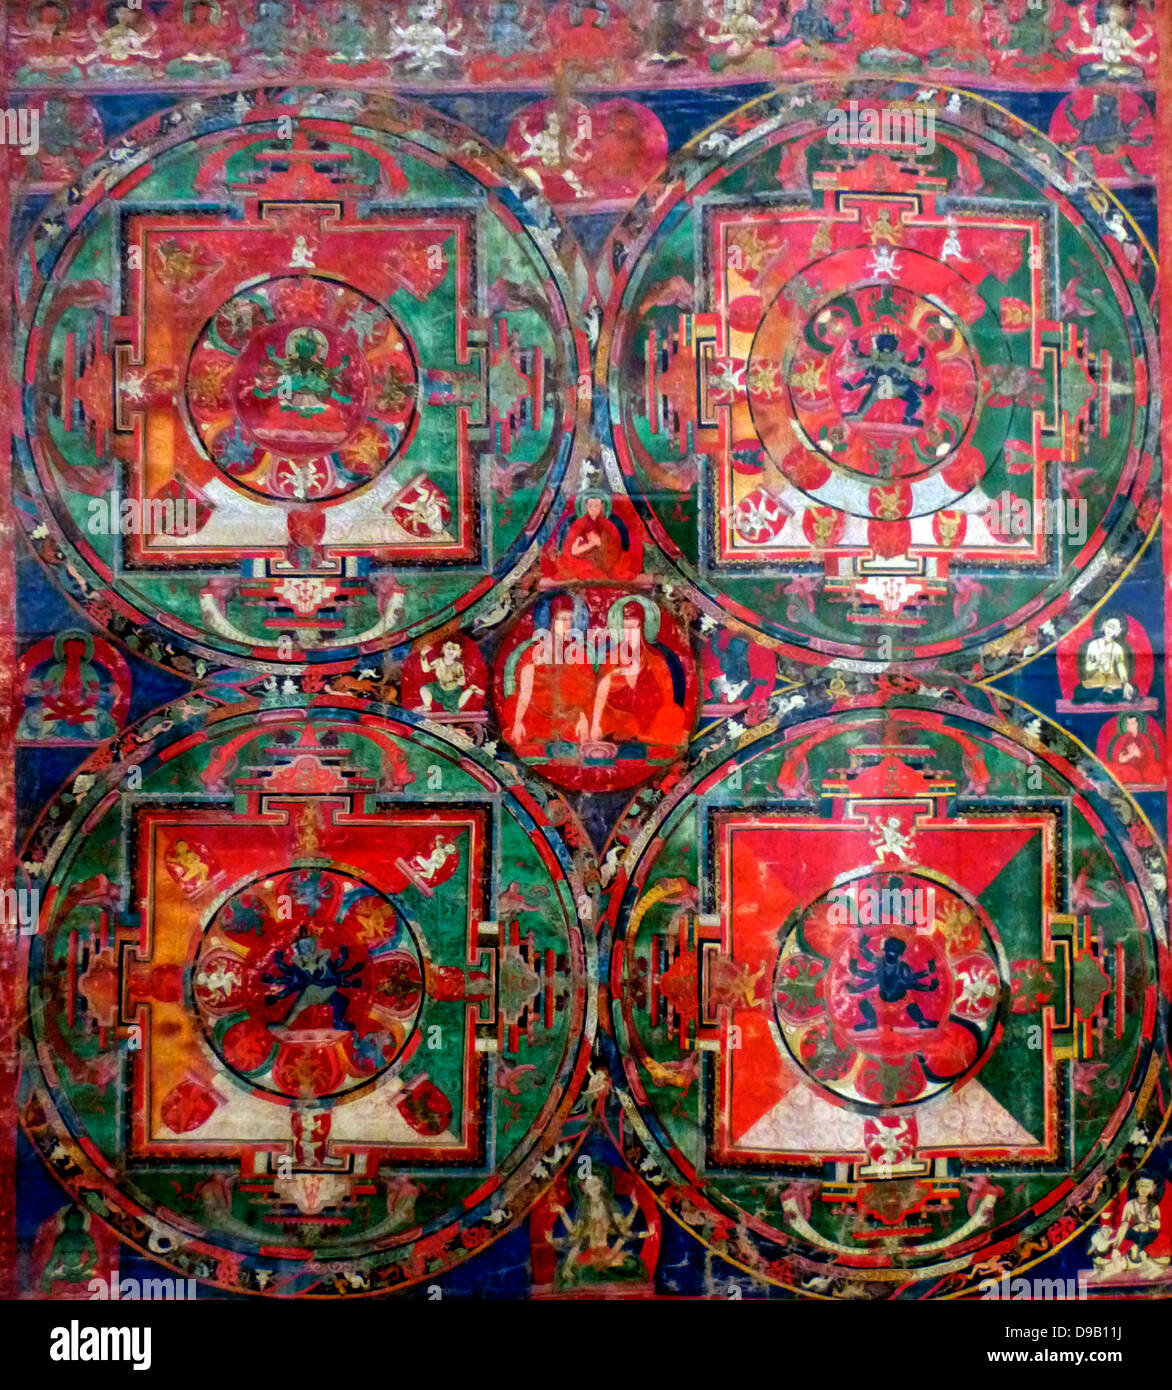 Scroll Painting (Thangka) with Four Mandalas 1400-1500.  Each of these four mandalas, or ritual diagrams, represents a sacred space. Stock Photo